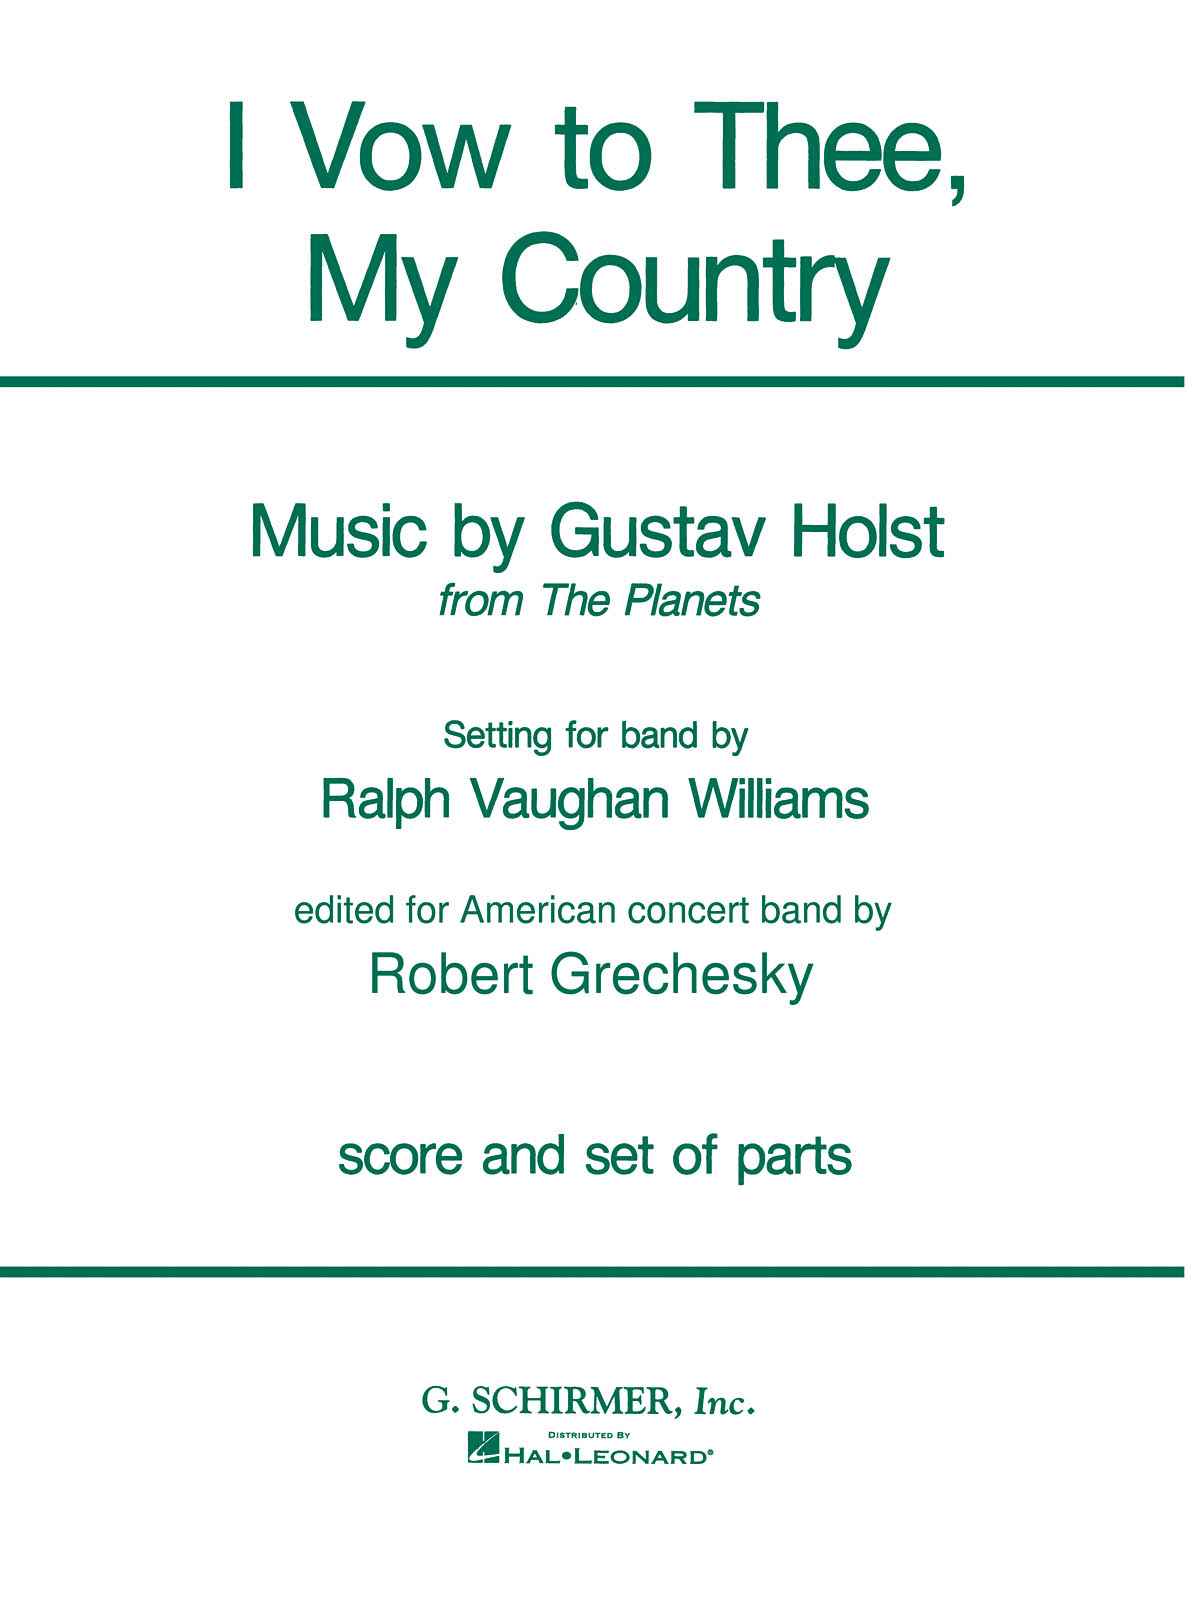 Gustav Holst: I Vow to Thee, My Country (Harmonie)